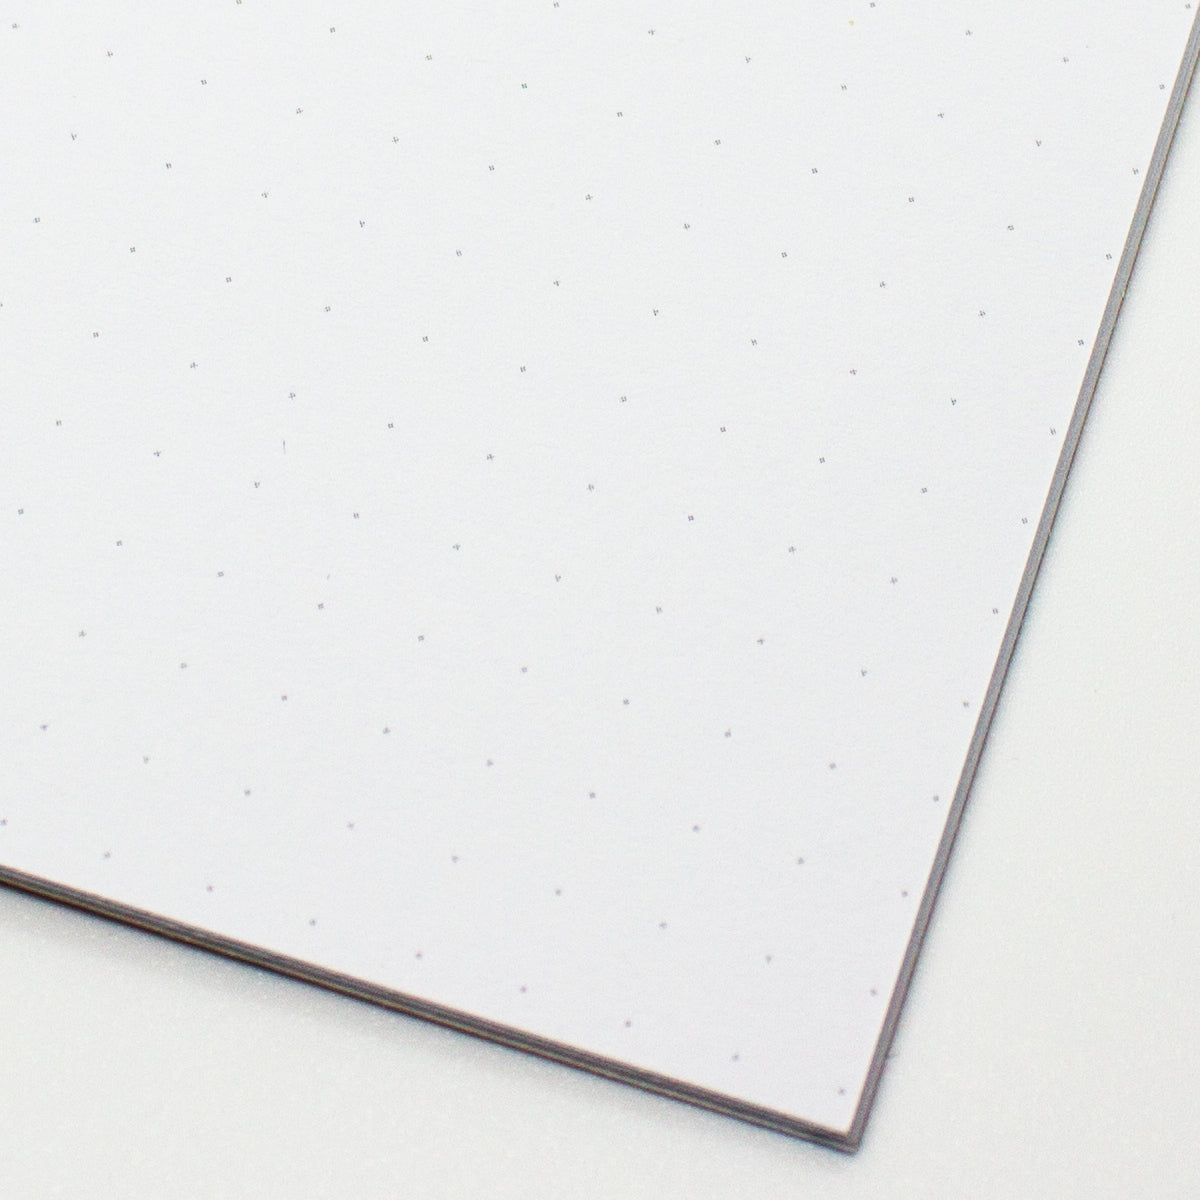 Notes Notebook - Dot Grid